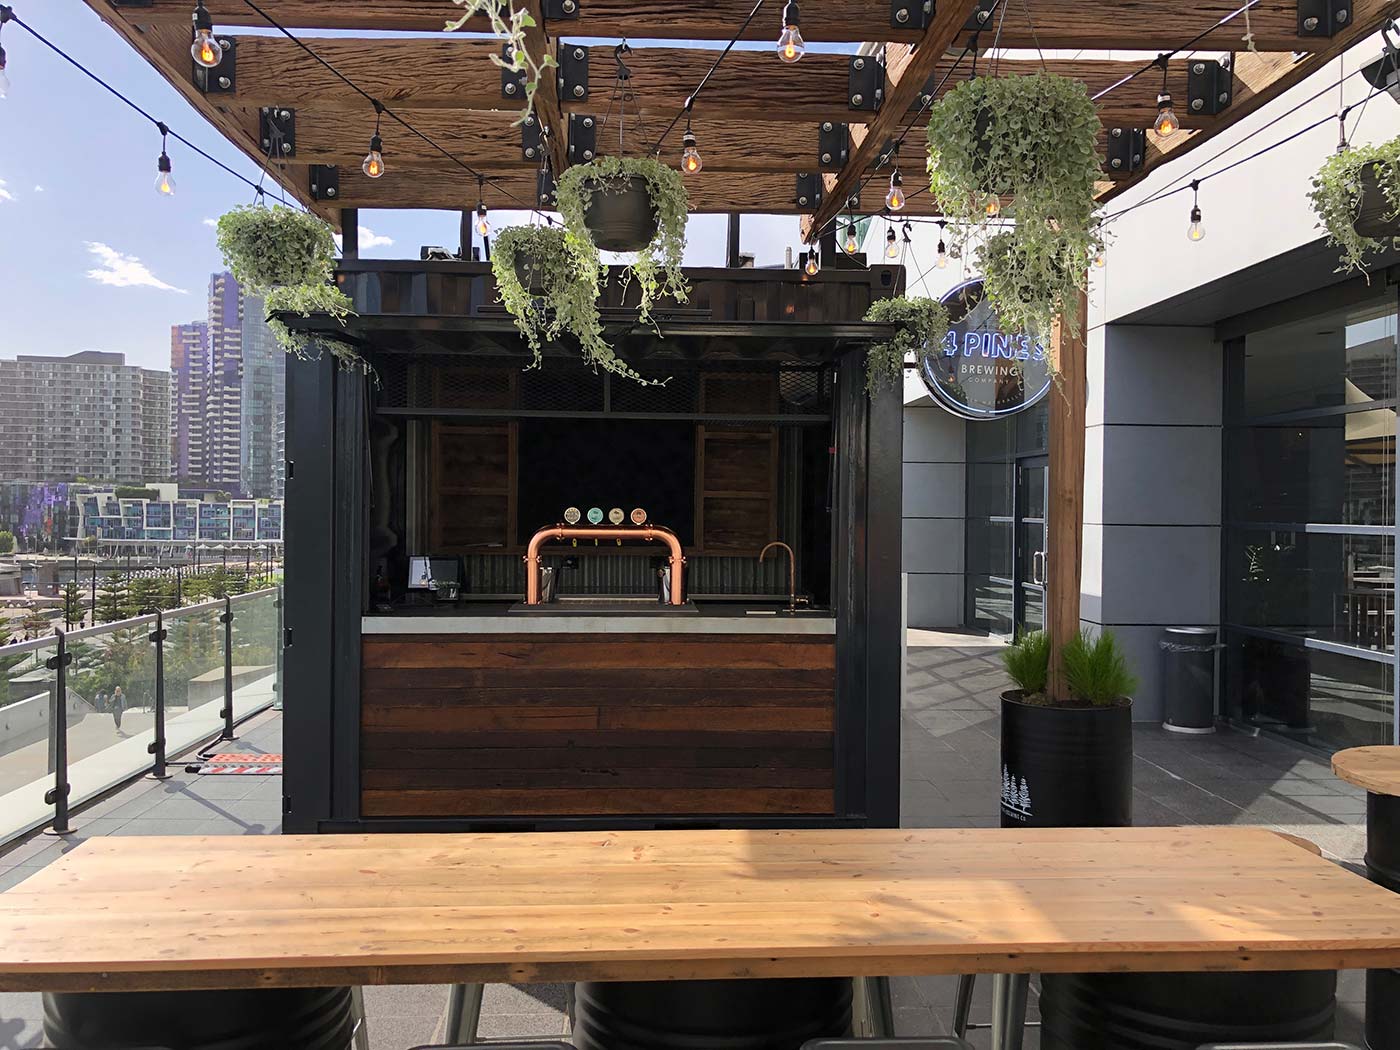 4-Pines-10ft-Shipping-Container-Bar-Conversion-4093